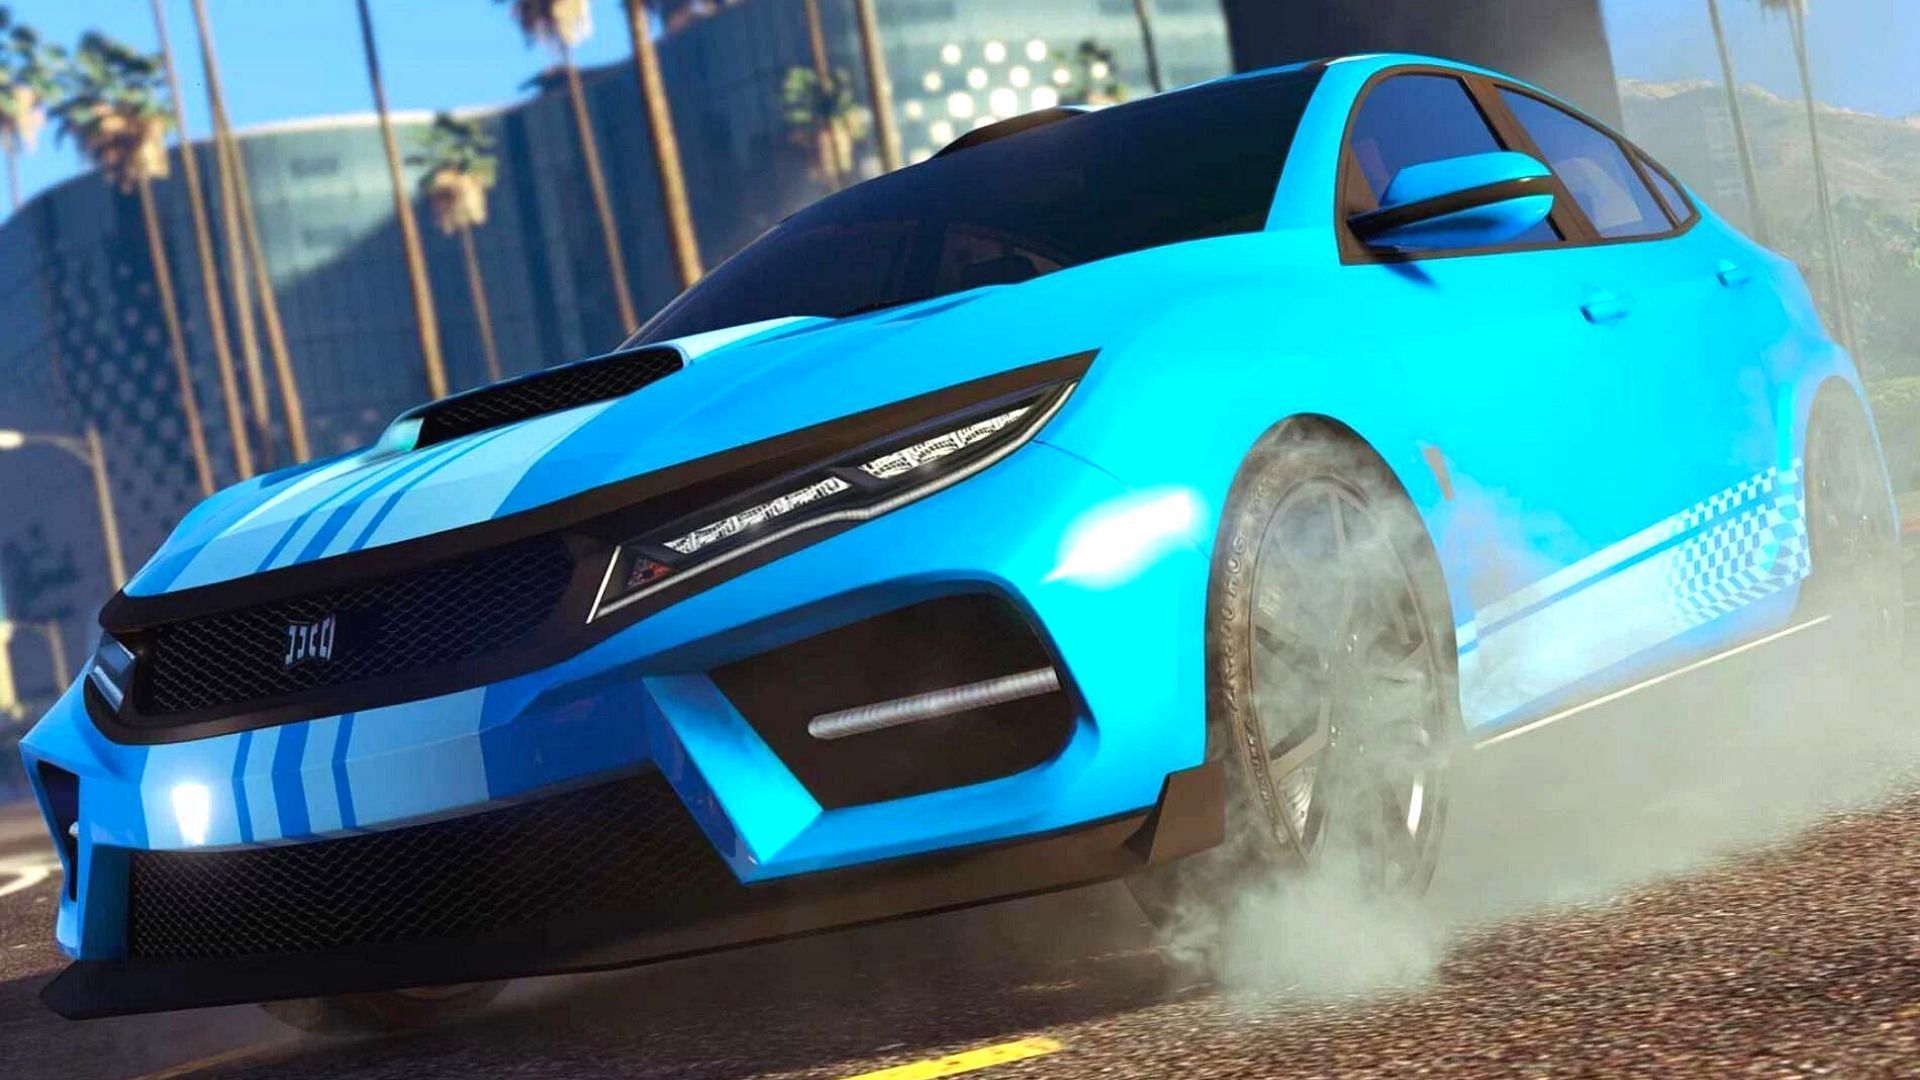 A new glitch allows players to win the podium car every time in GTA Online (Image via Sportskeeda)